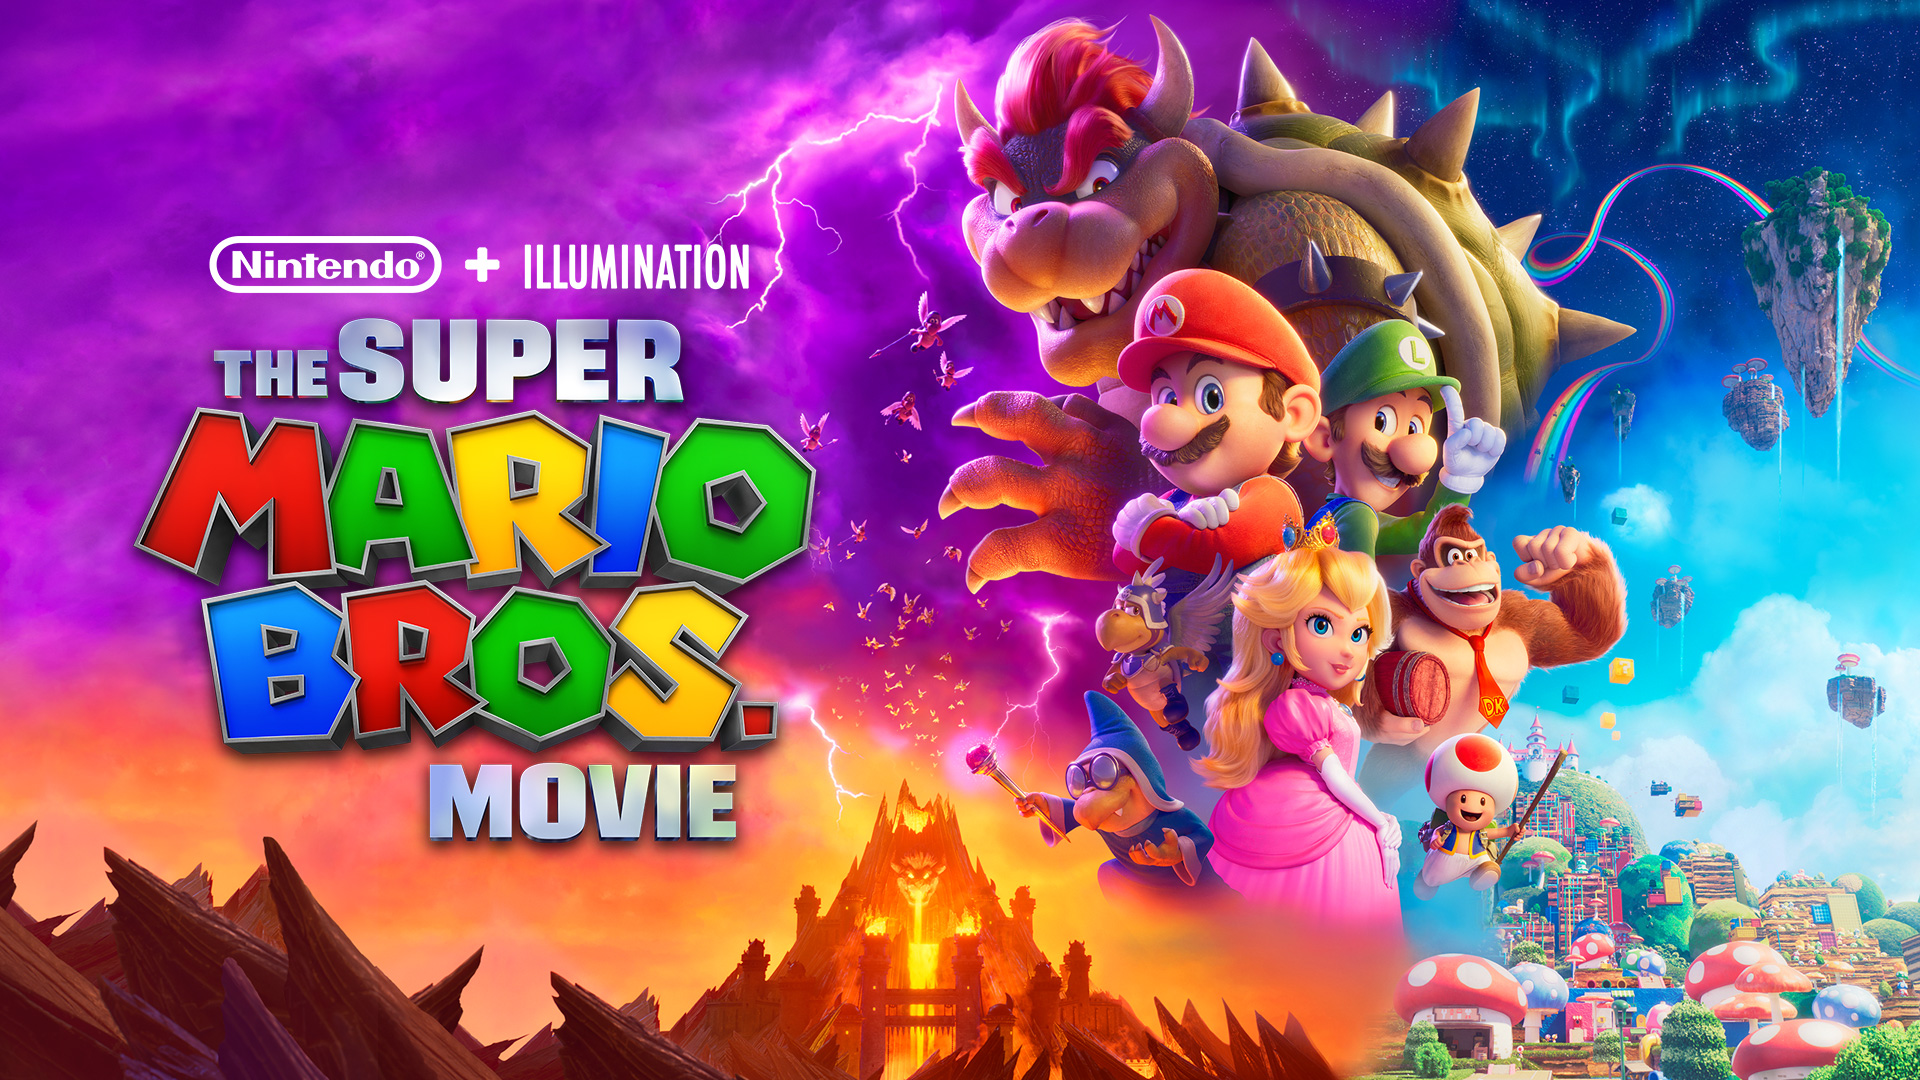 Optimum's A Go! Catch The Super Mario Bros. Movie Which Follows Mario And Luigi On A Whirlwind Adventure Through Mushroom Kingdom, As They Unite With A Cast Of Familiar Characters